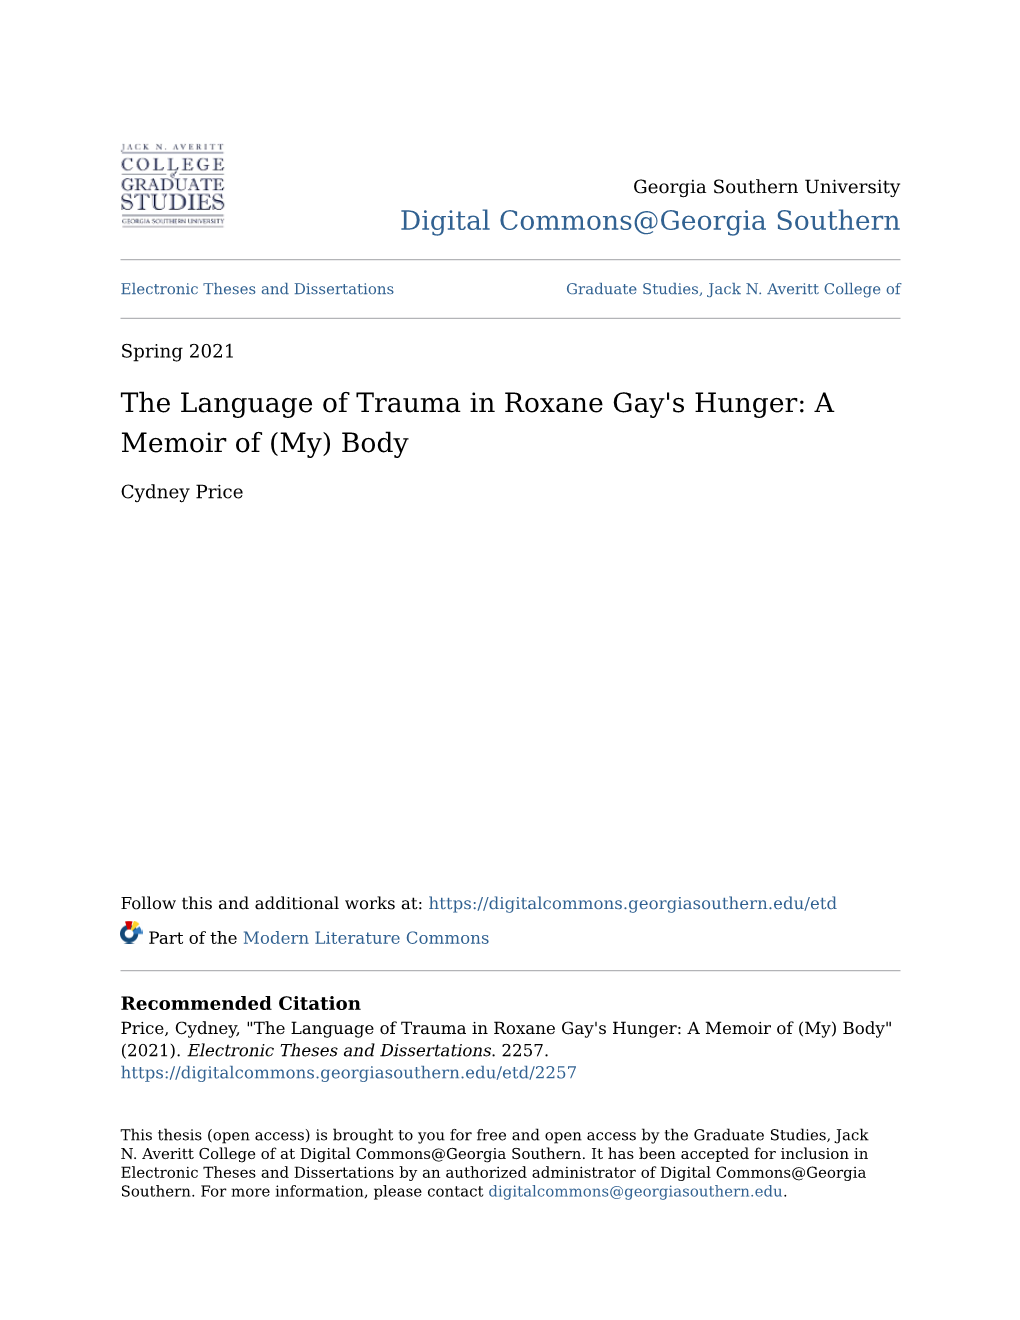 The Language of Trauma in Roxane Gay's Hunger: a Memoir of (My) Body